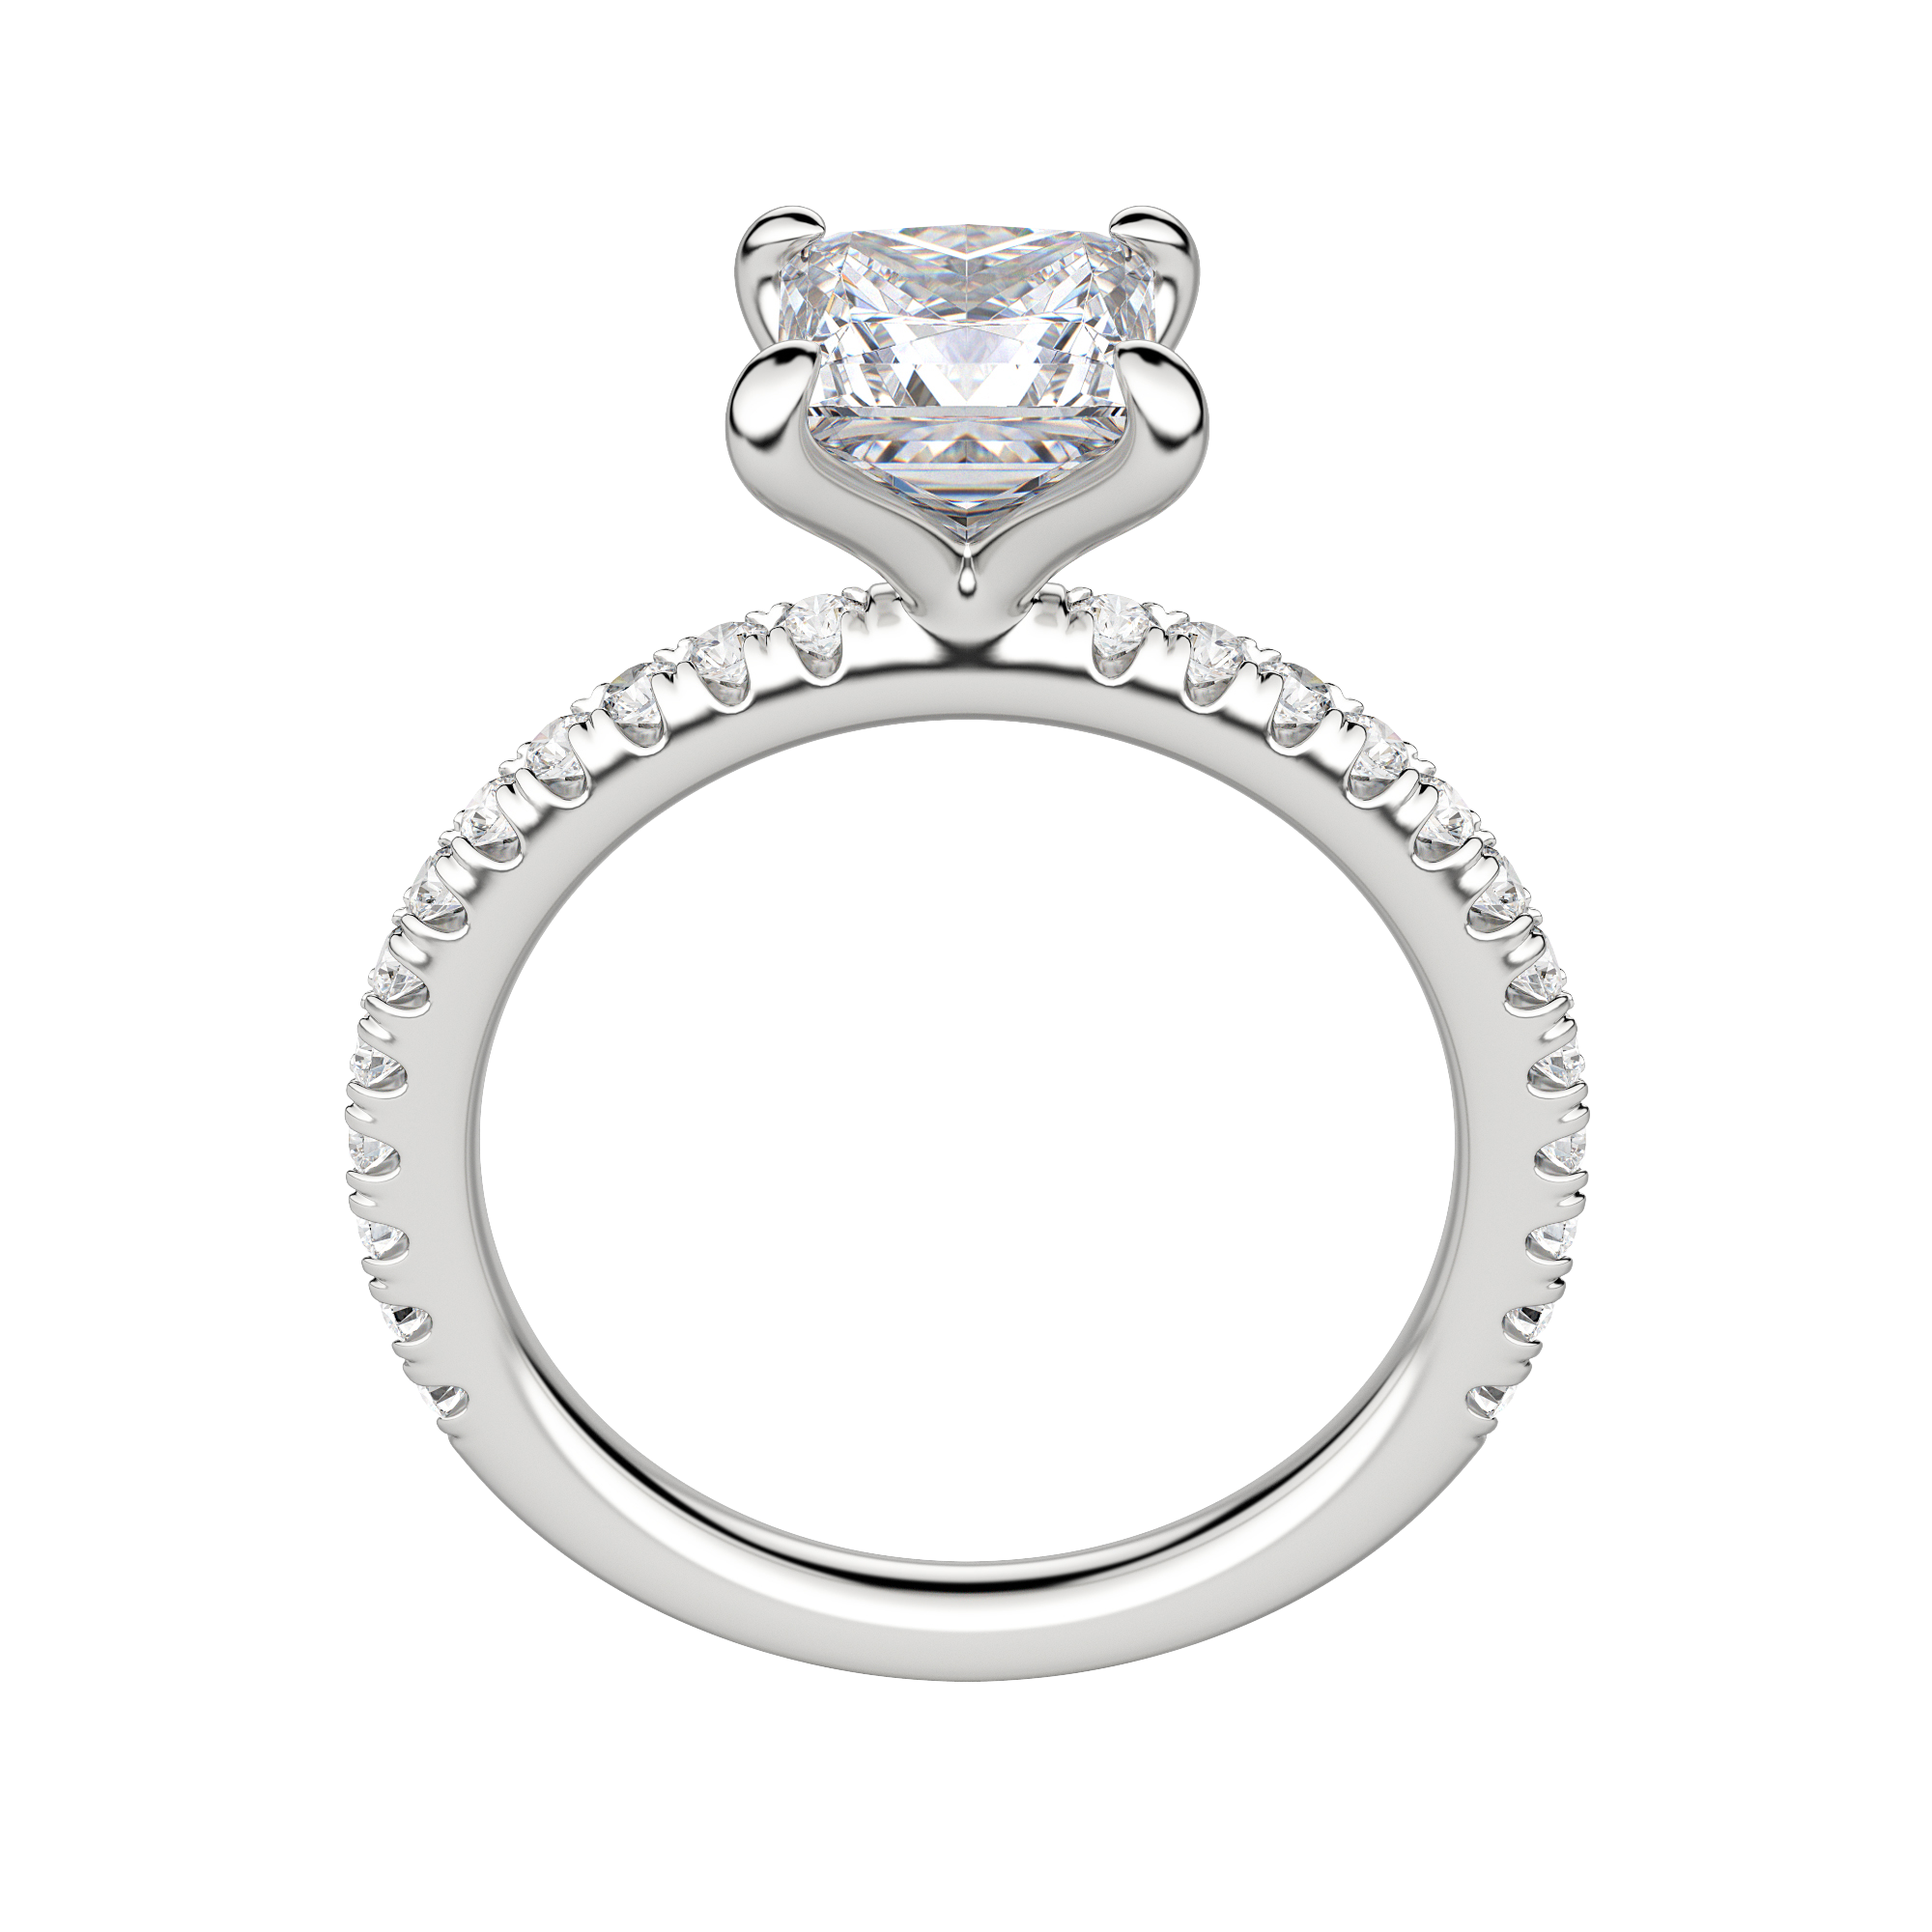 Lyre Accented Princess Cut Engagement Ring, Hover, 18K White Gold, Platinum, 